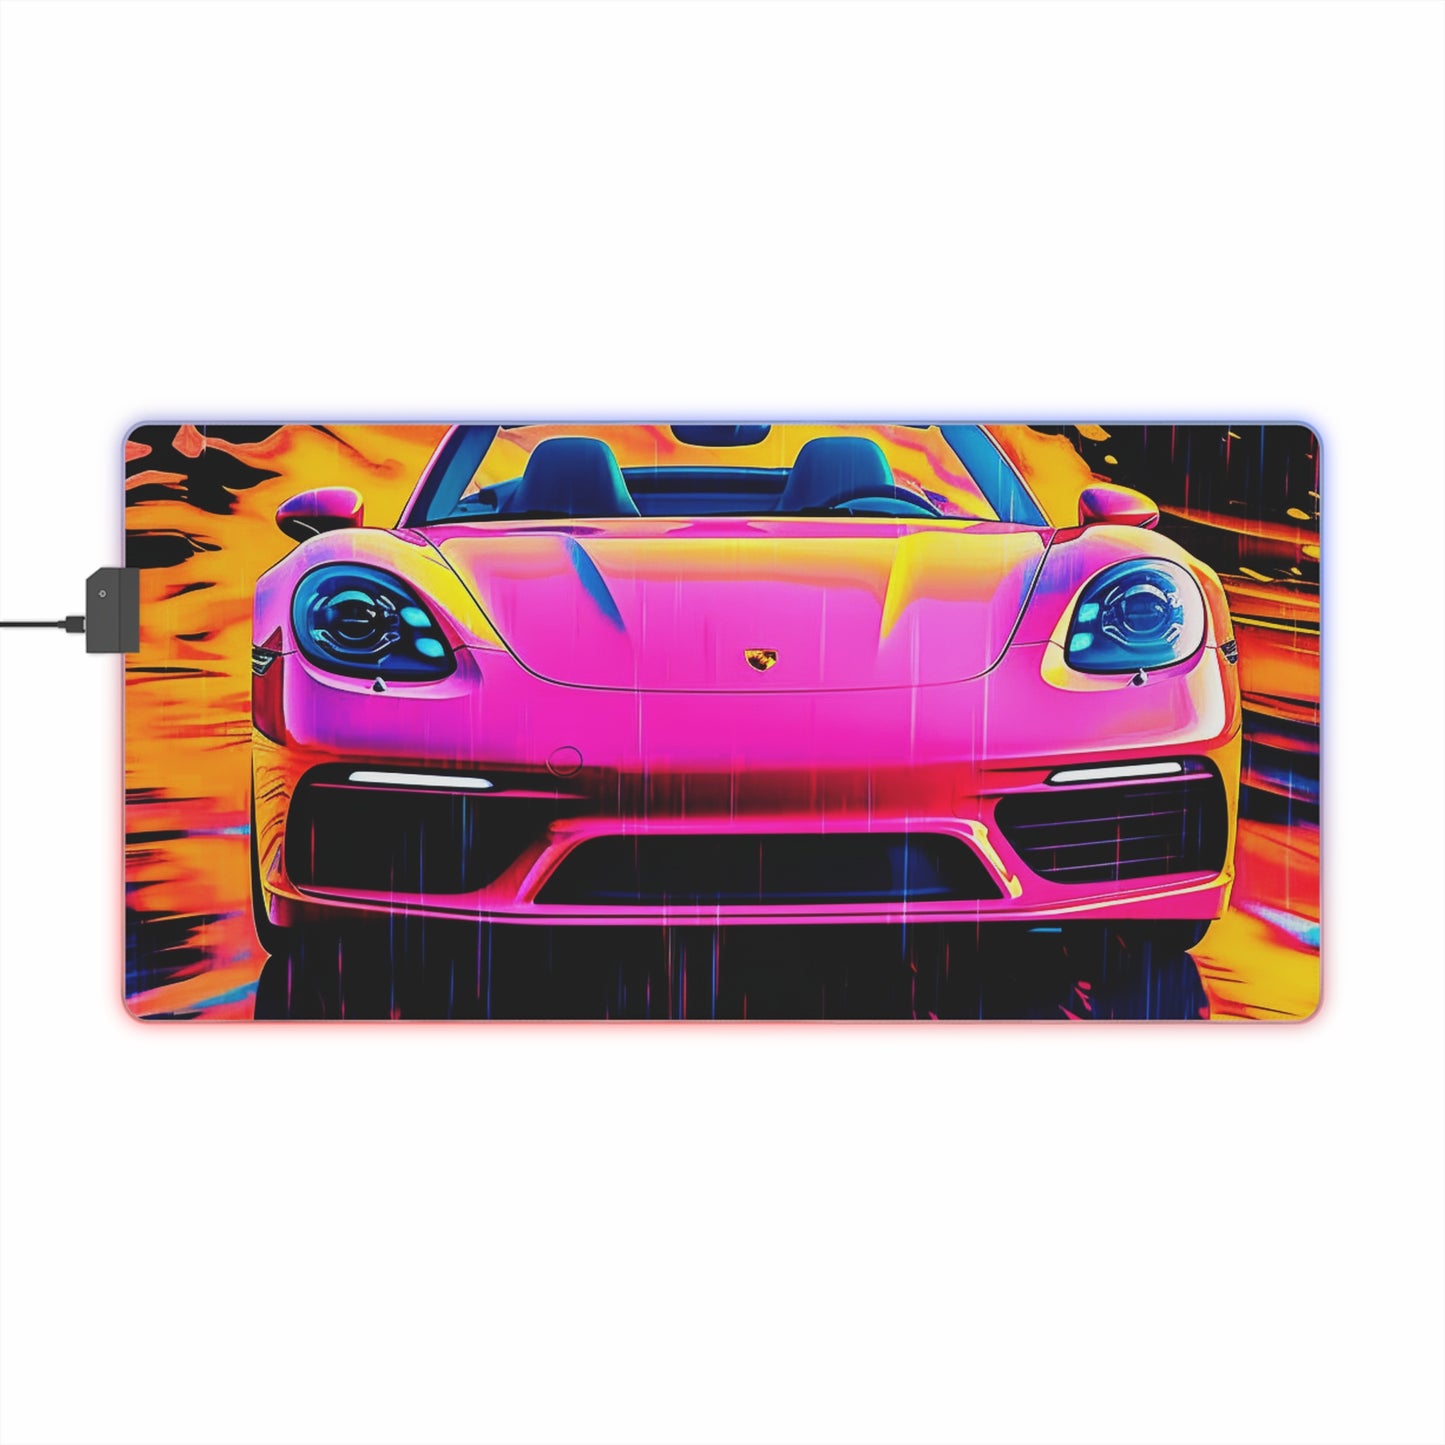 LED Gaming Mouse Pad Pink Porsche water fusion 1